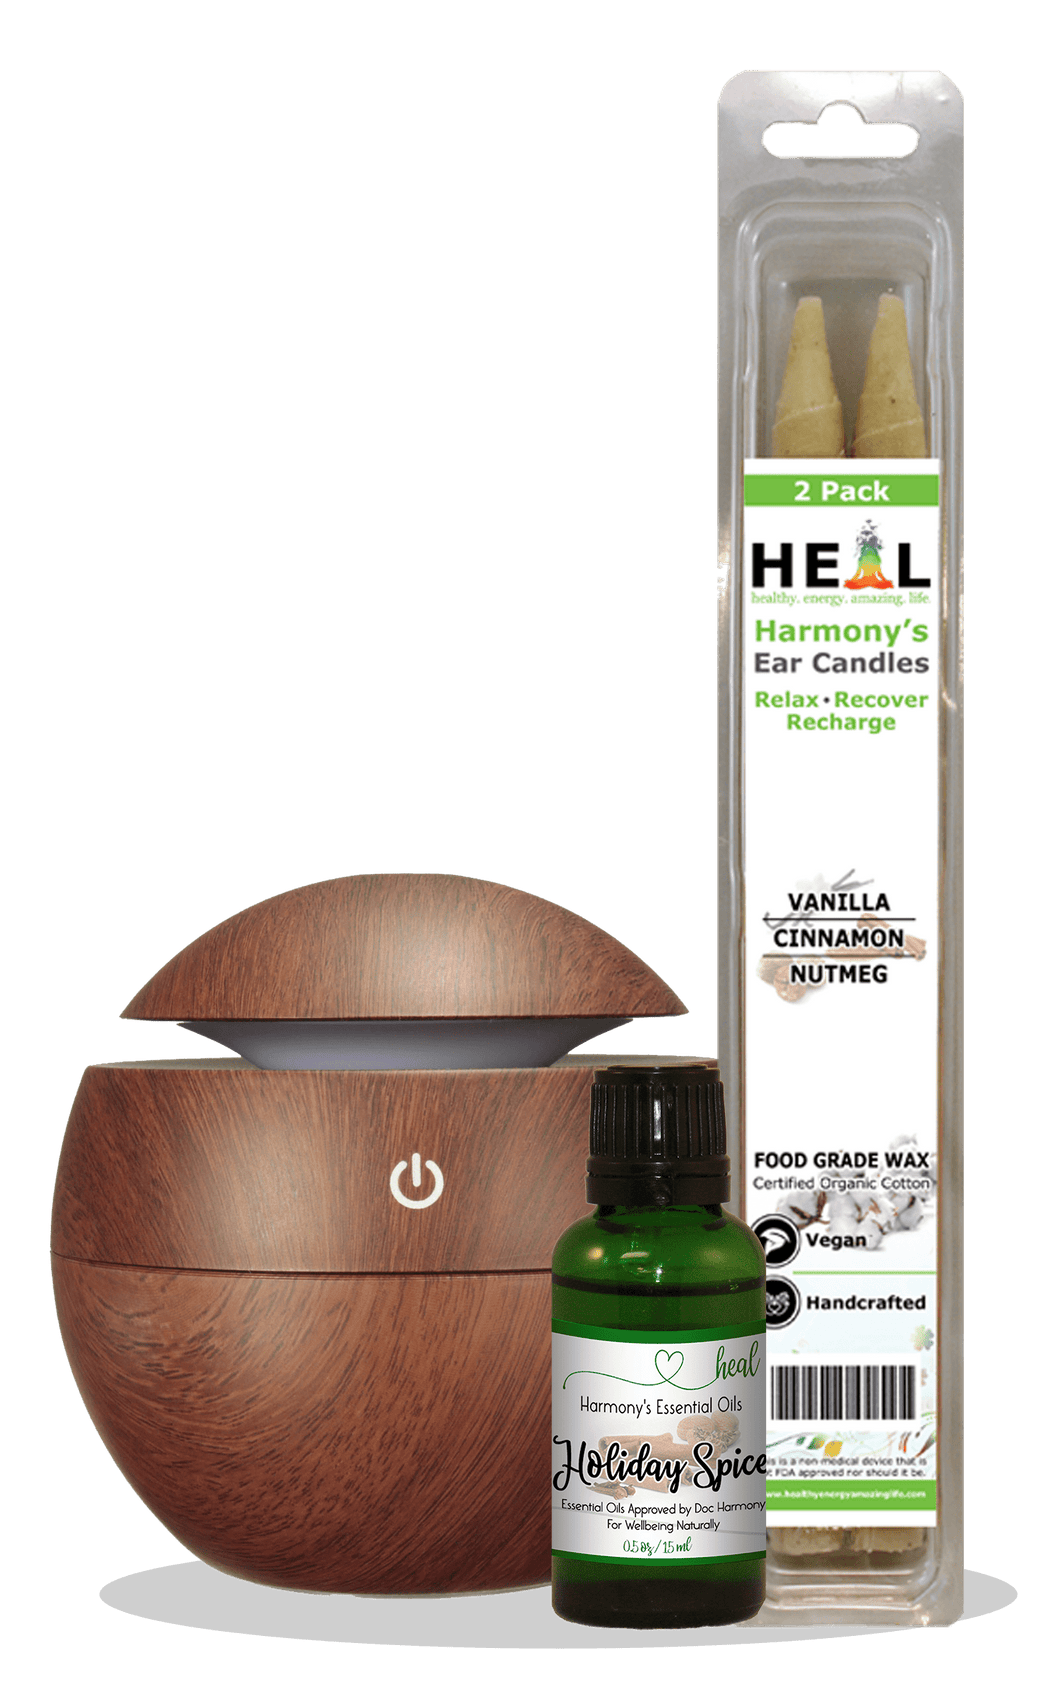 happyenergyamazinglife Natural Health Products H.E.A.L.’s Aroma Diffuser Gift Kit